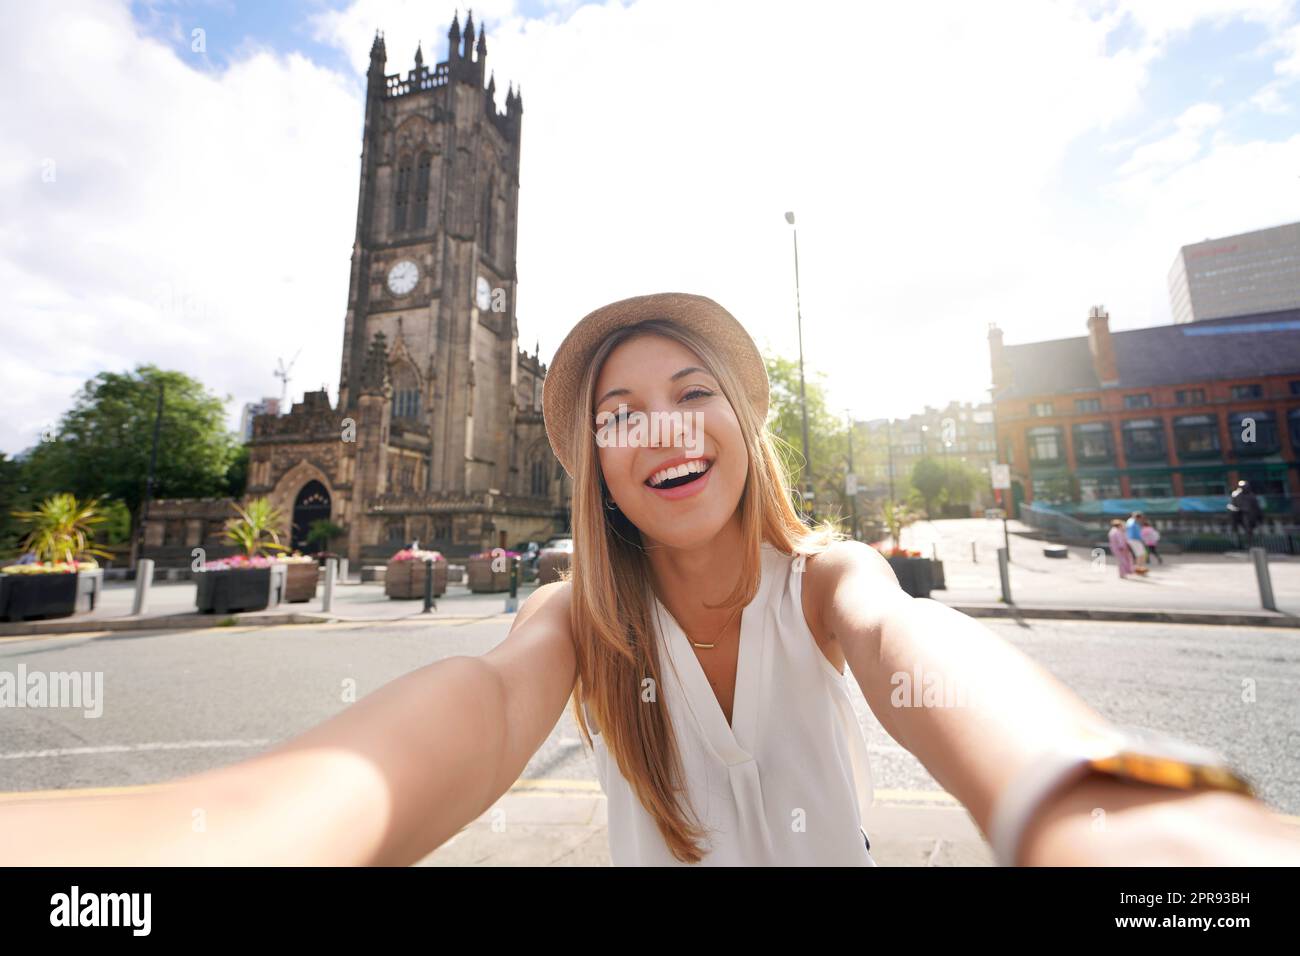 Smiling girl takes selfie photo in Manchester, England, United Kingdom Stock Photo